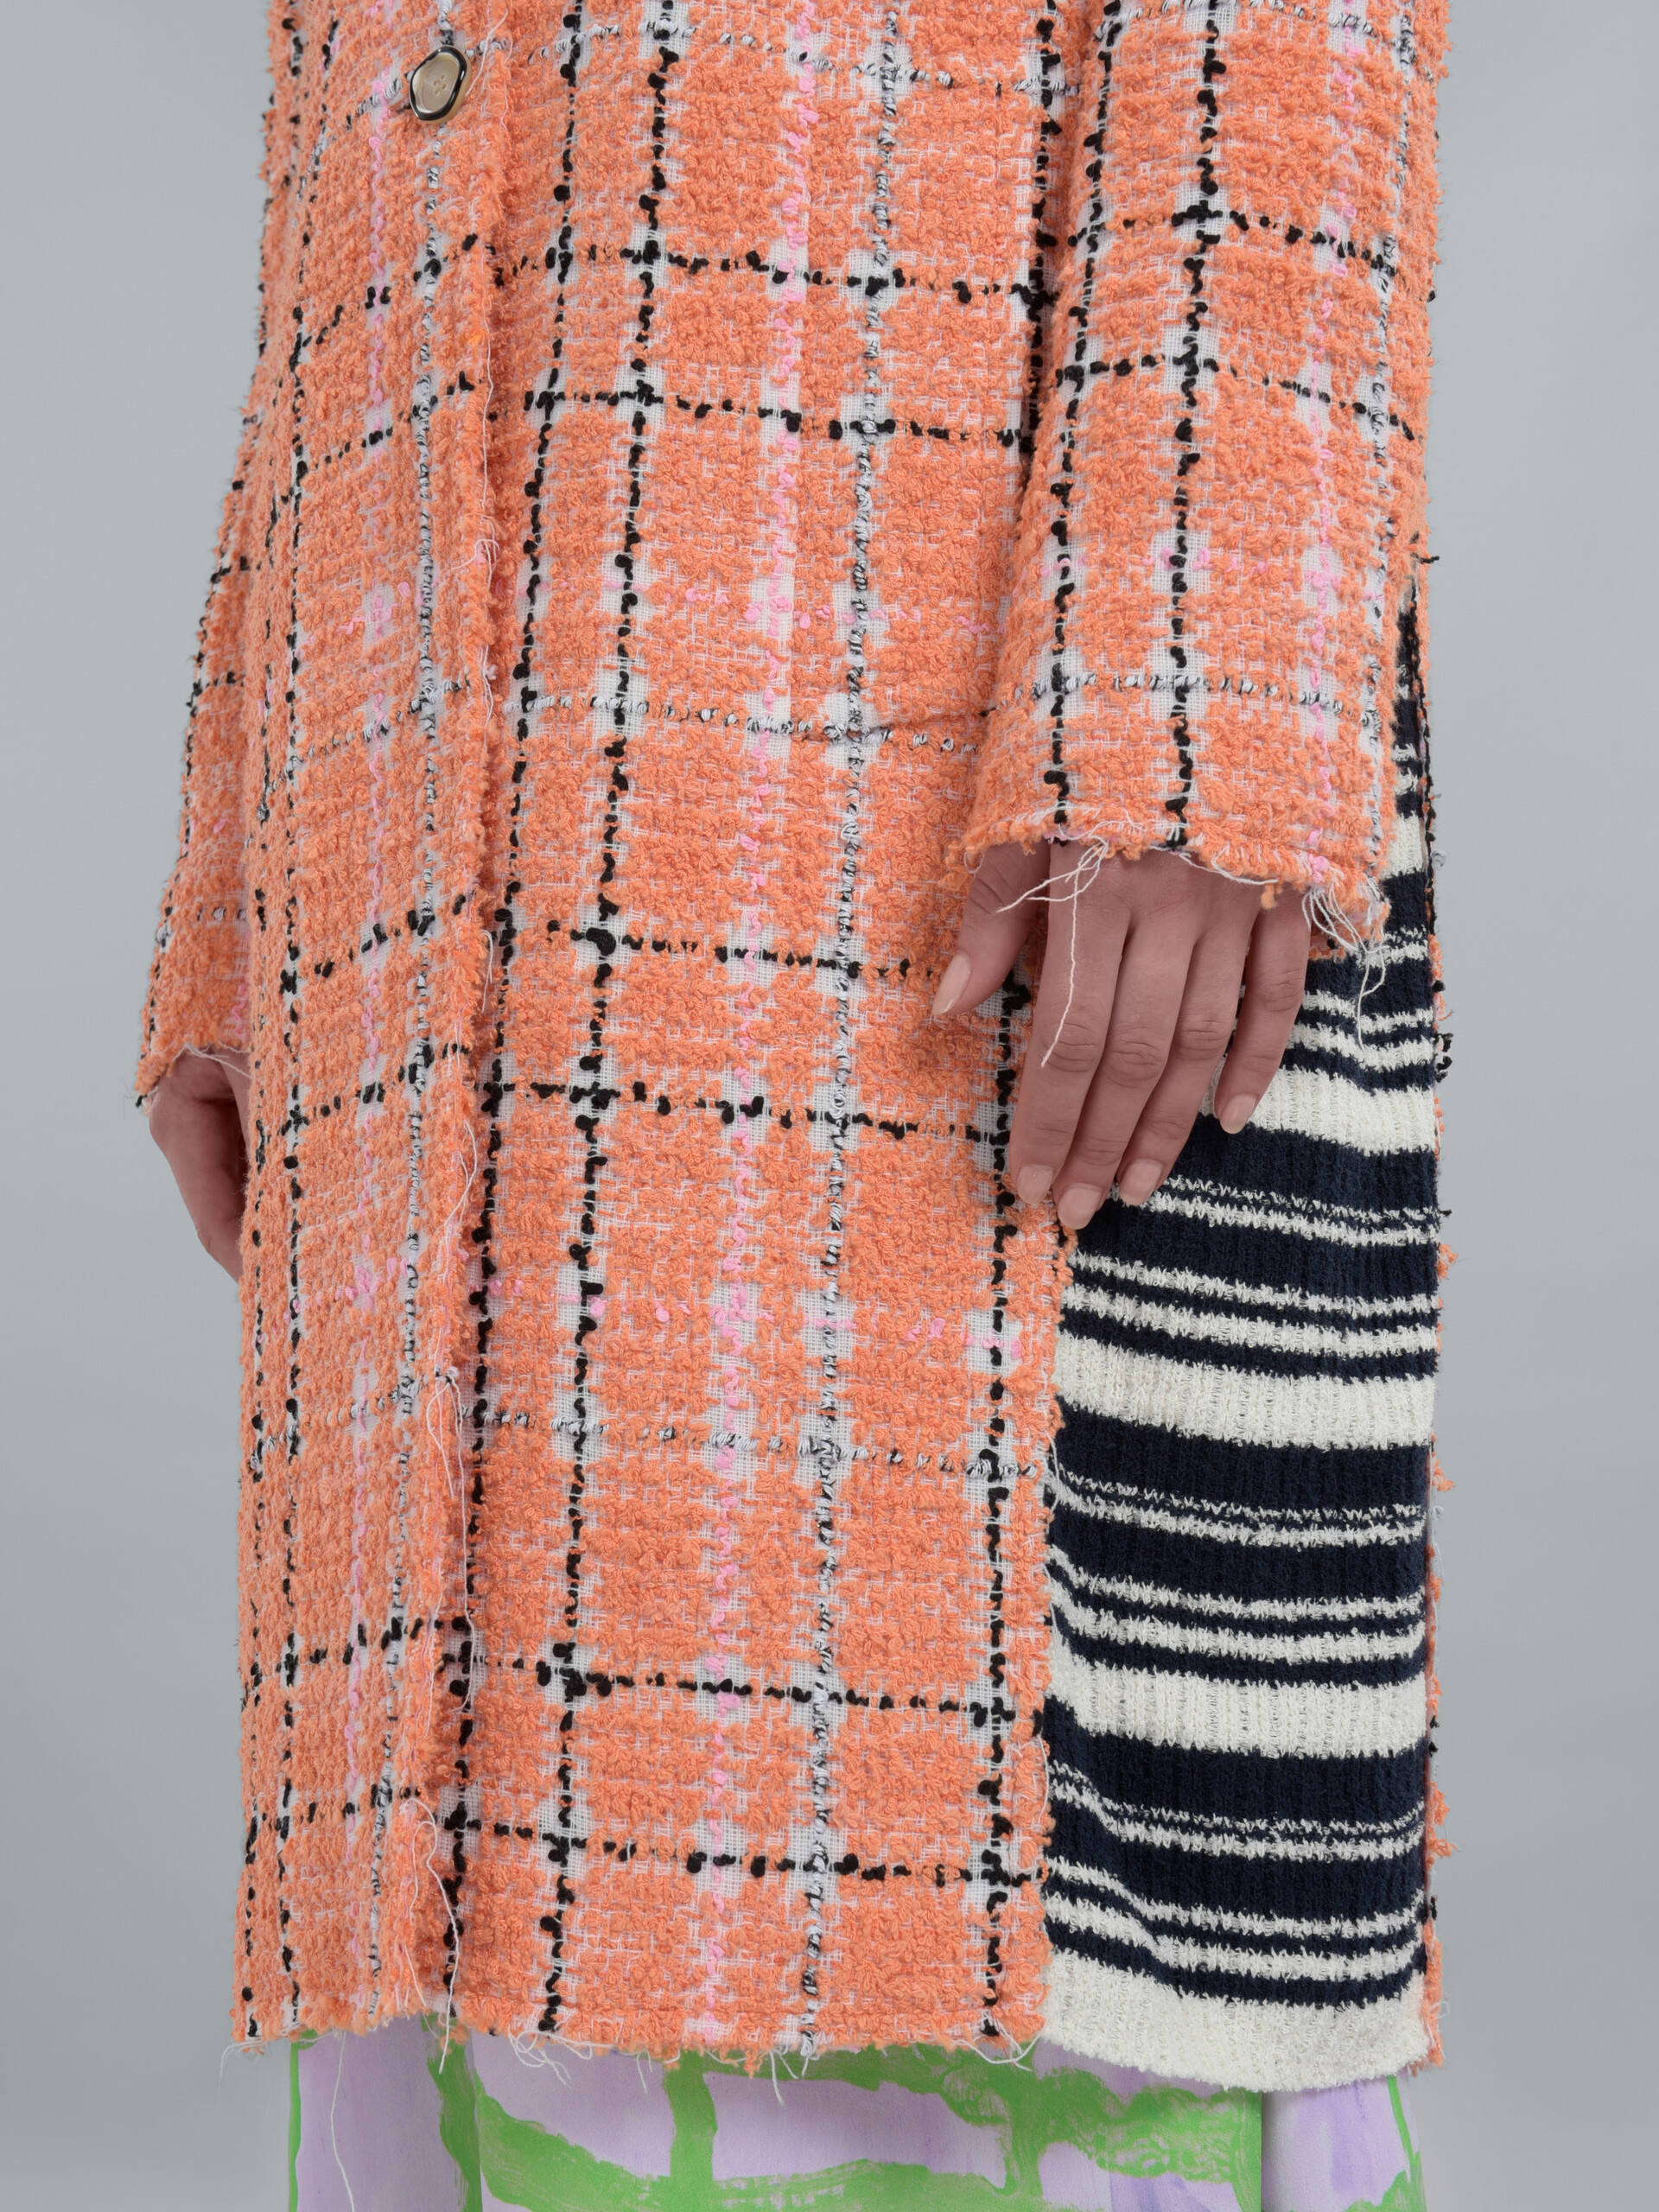 Cotton tweed coat with knitted inserts - Coat - Image 5